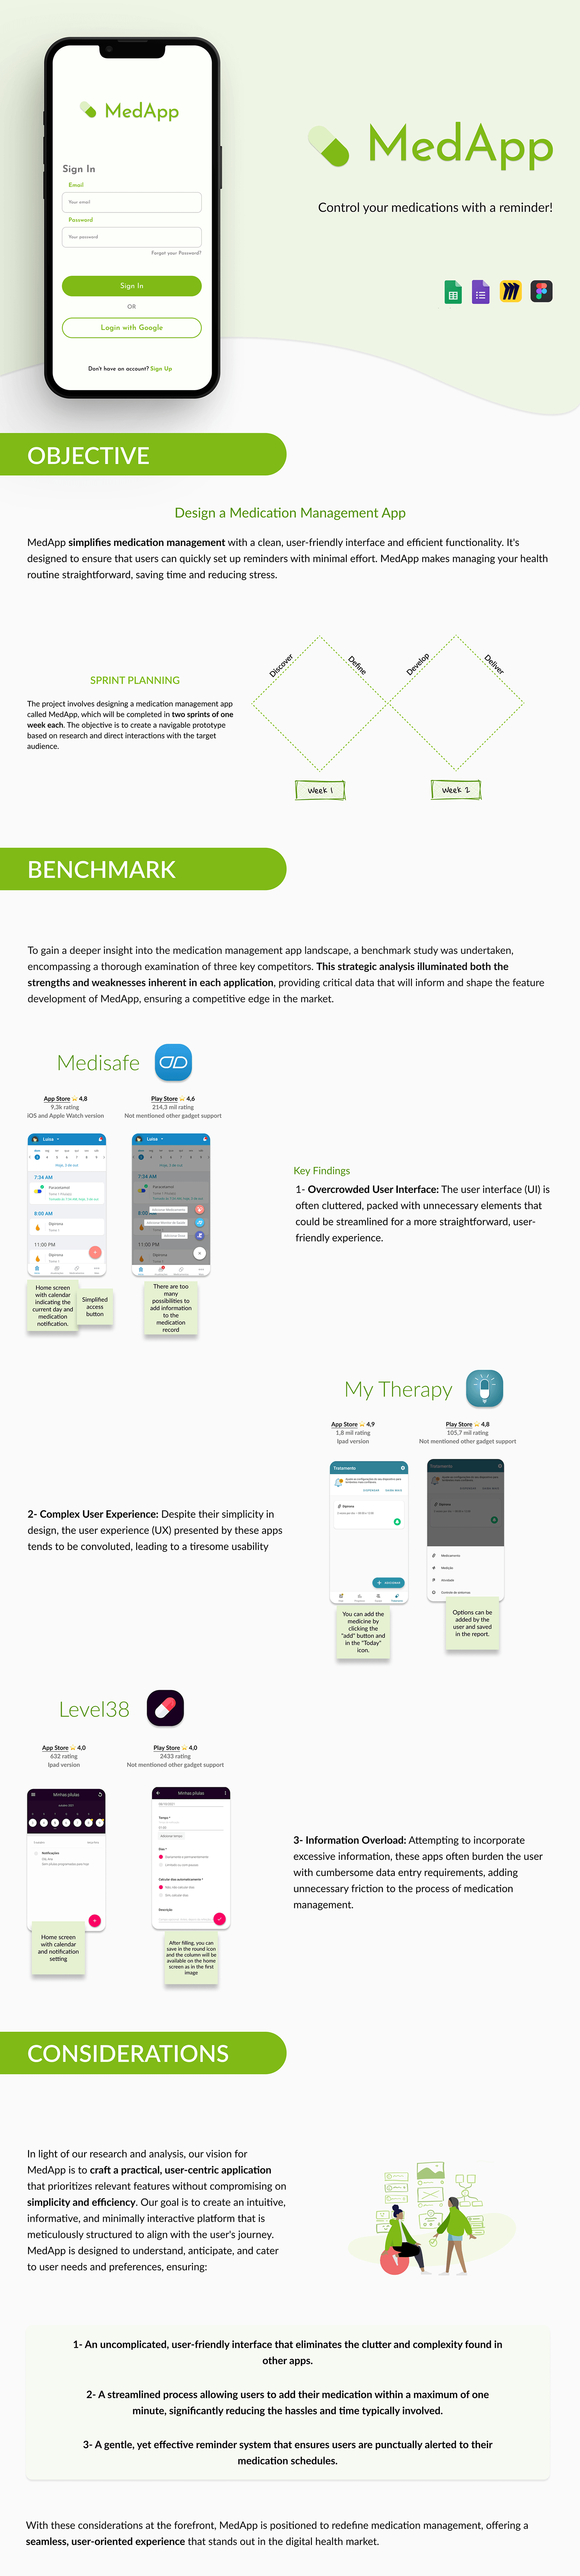 Case Study prototype UI/UX Mobile app application user experience BENCHMARK research visual identity